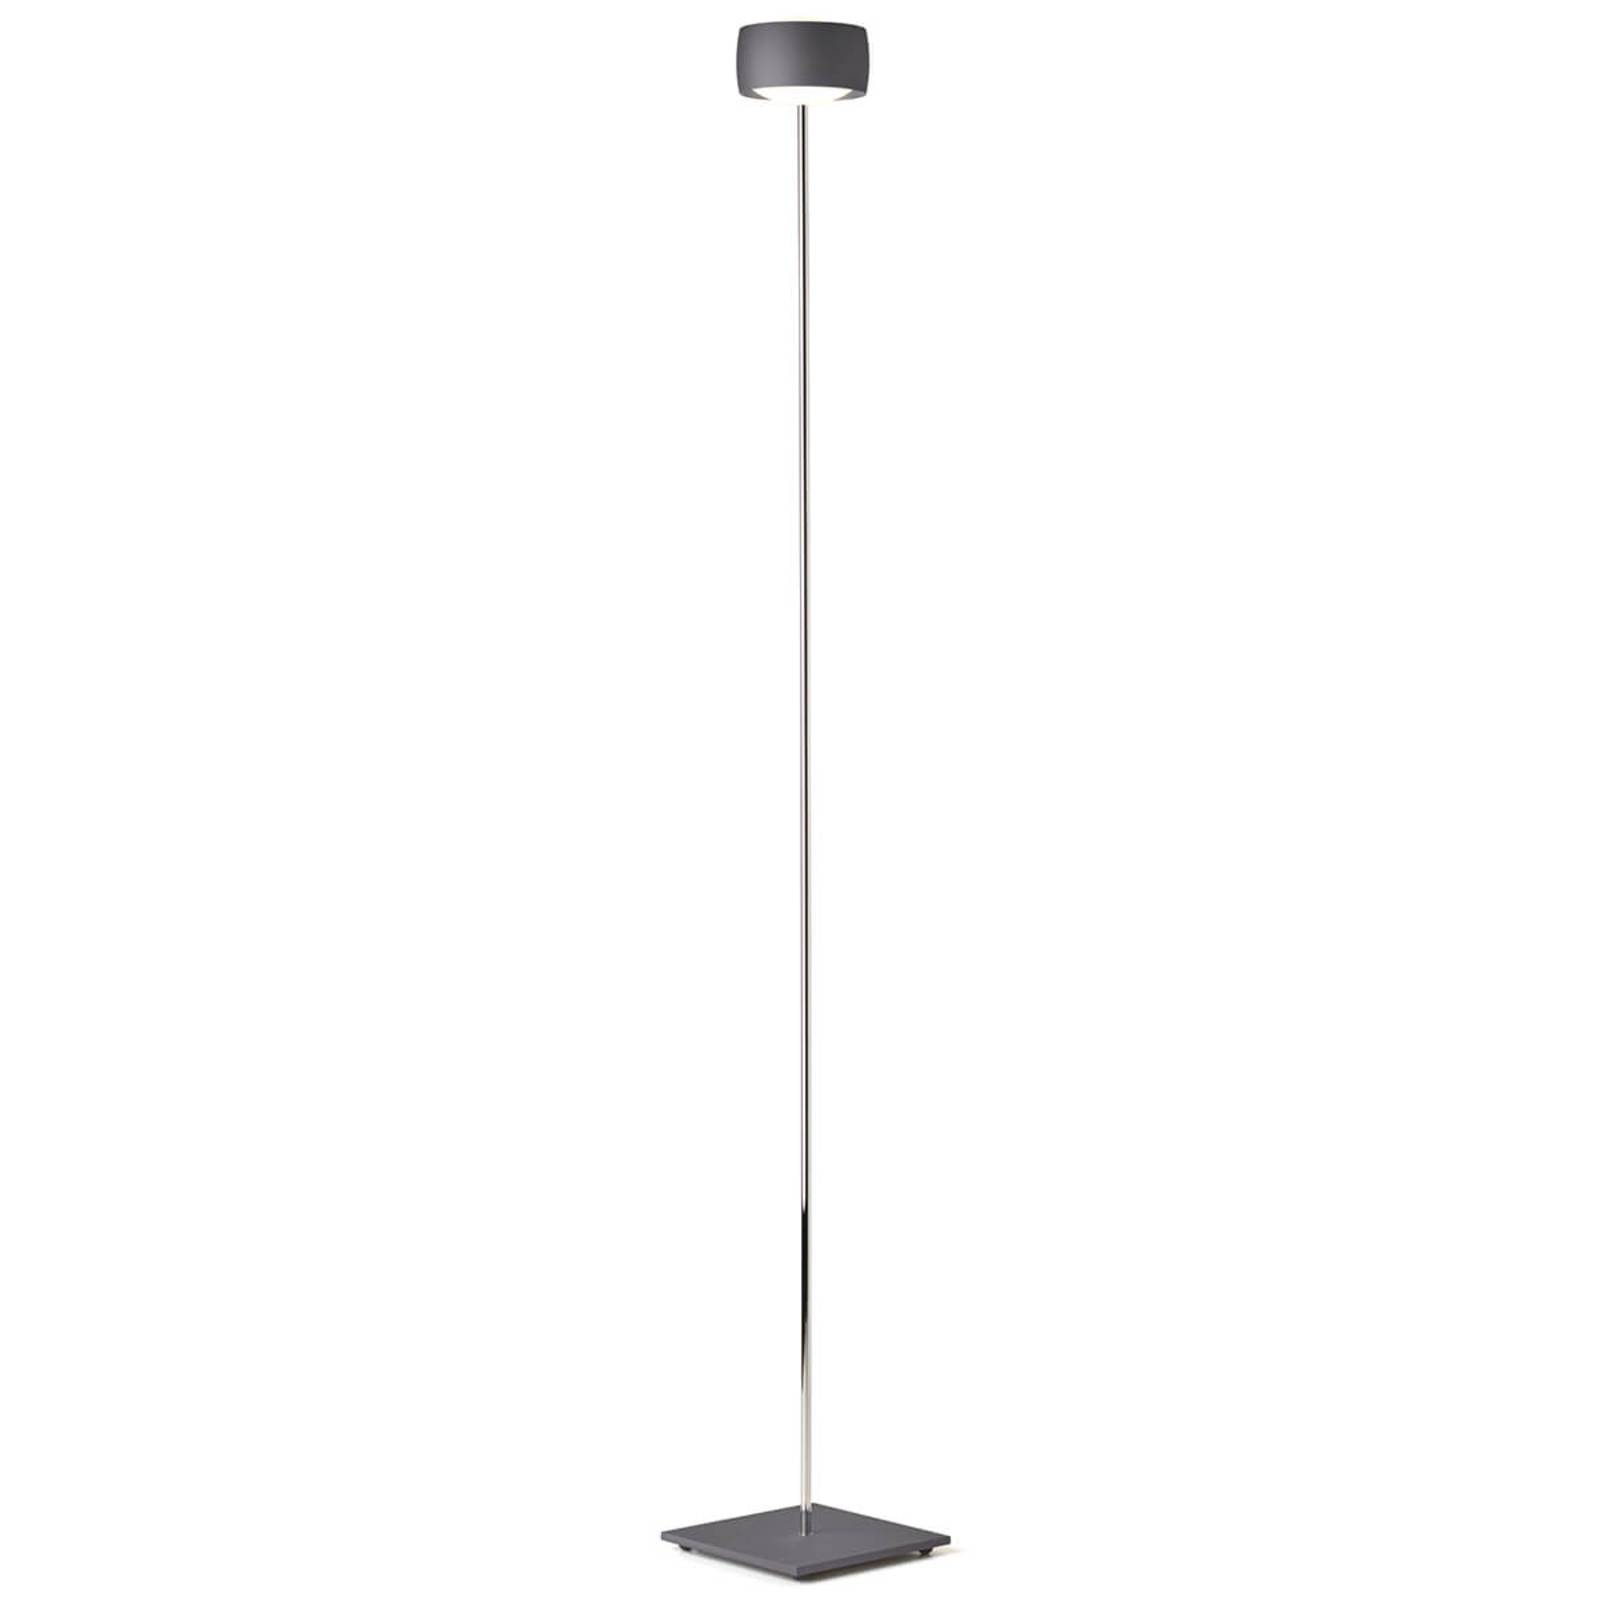 LED floor lamp Grace with gesture control, grey